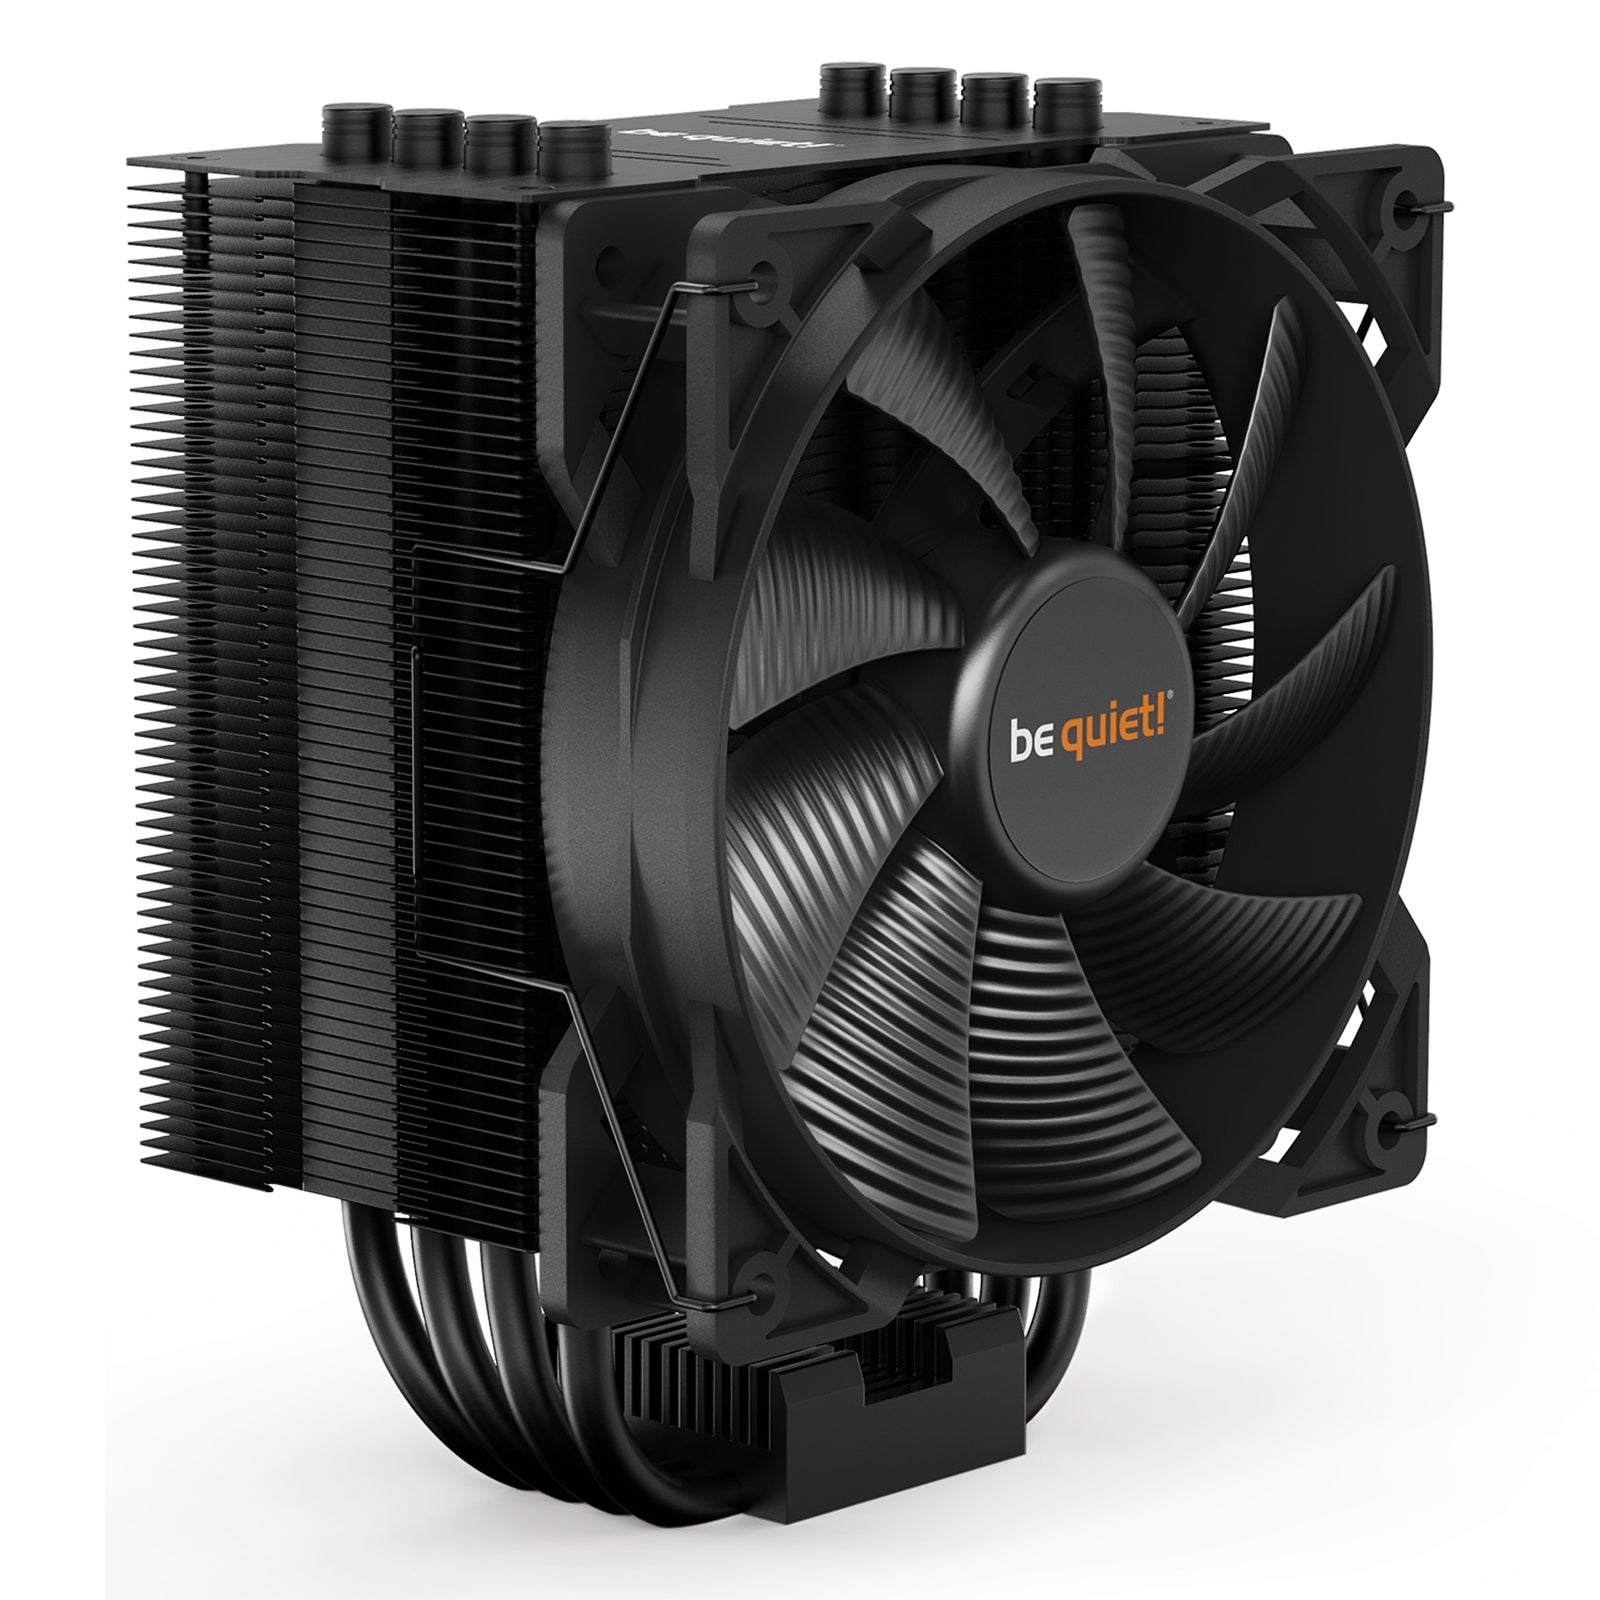 Silent Performance CPU Cooler be quiet! Pure Rock 2 Black with PWM Control and High-End Heat Pipes